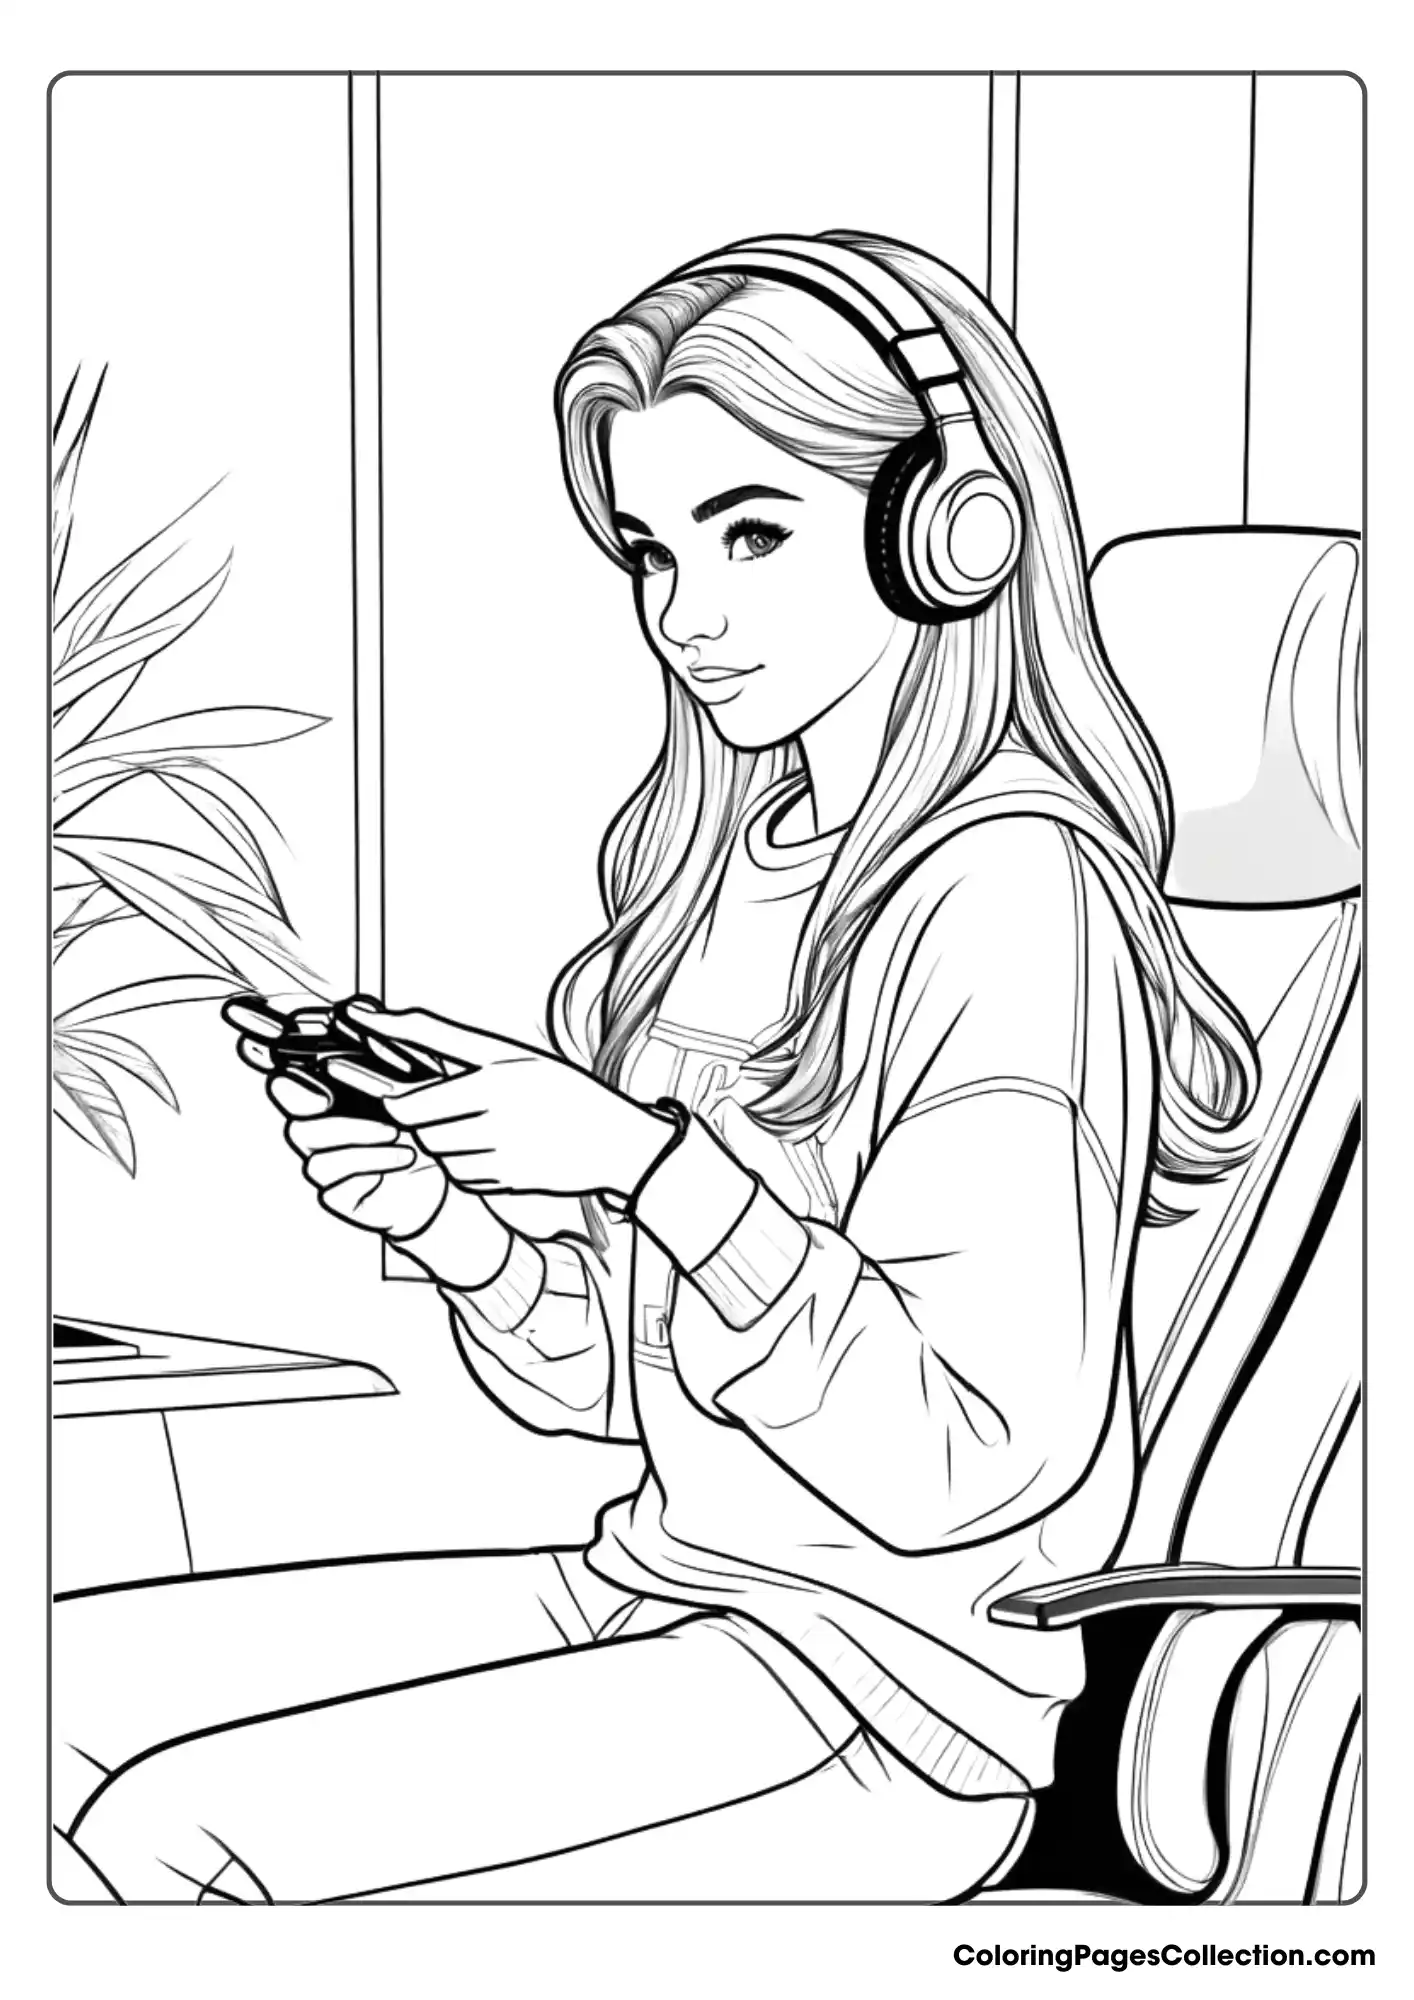 Coloring pages for teens, Girl Playing Videogame